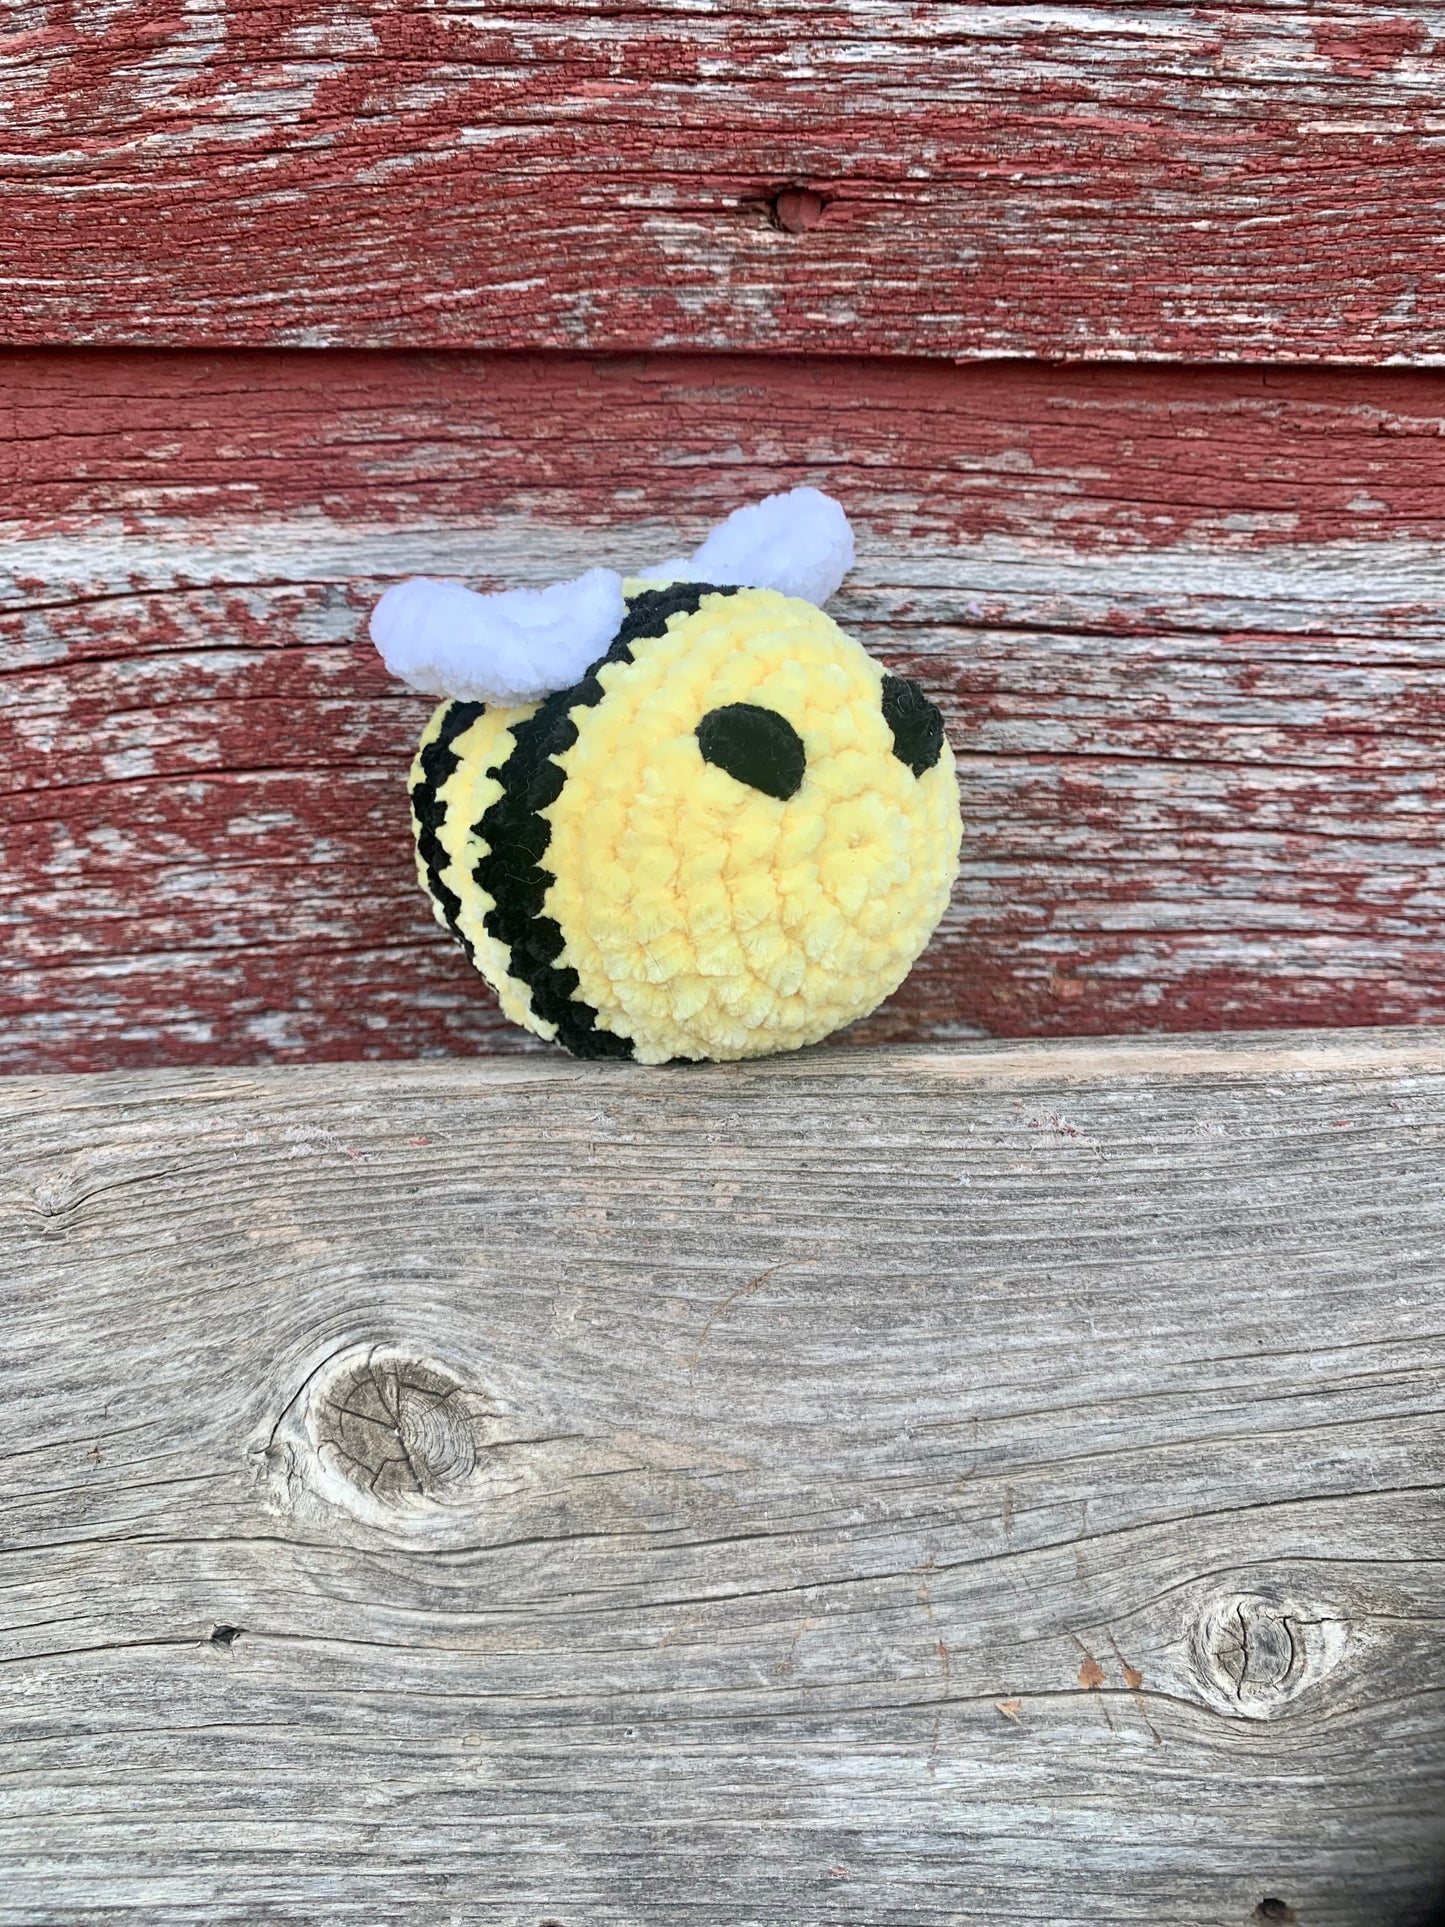 Buzz the Bee